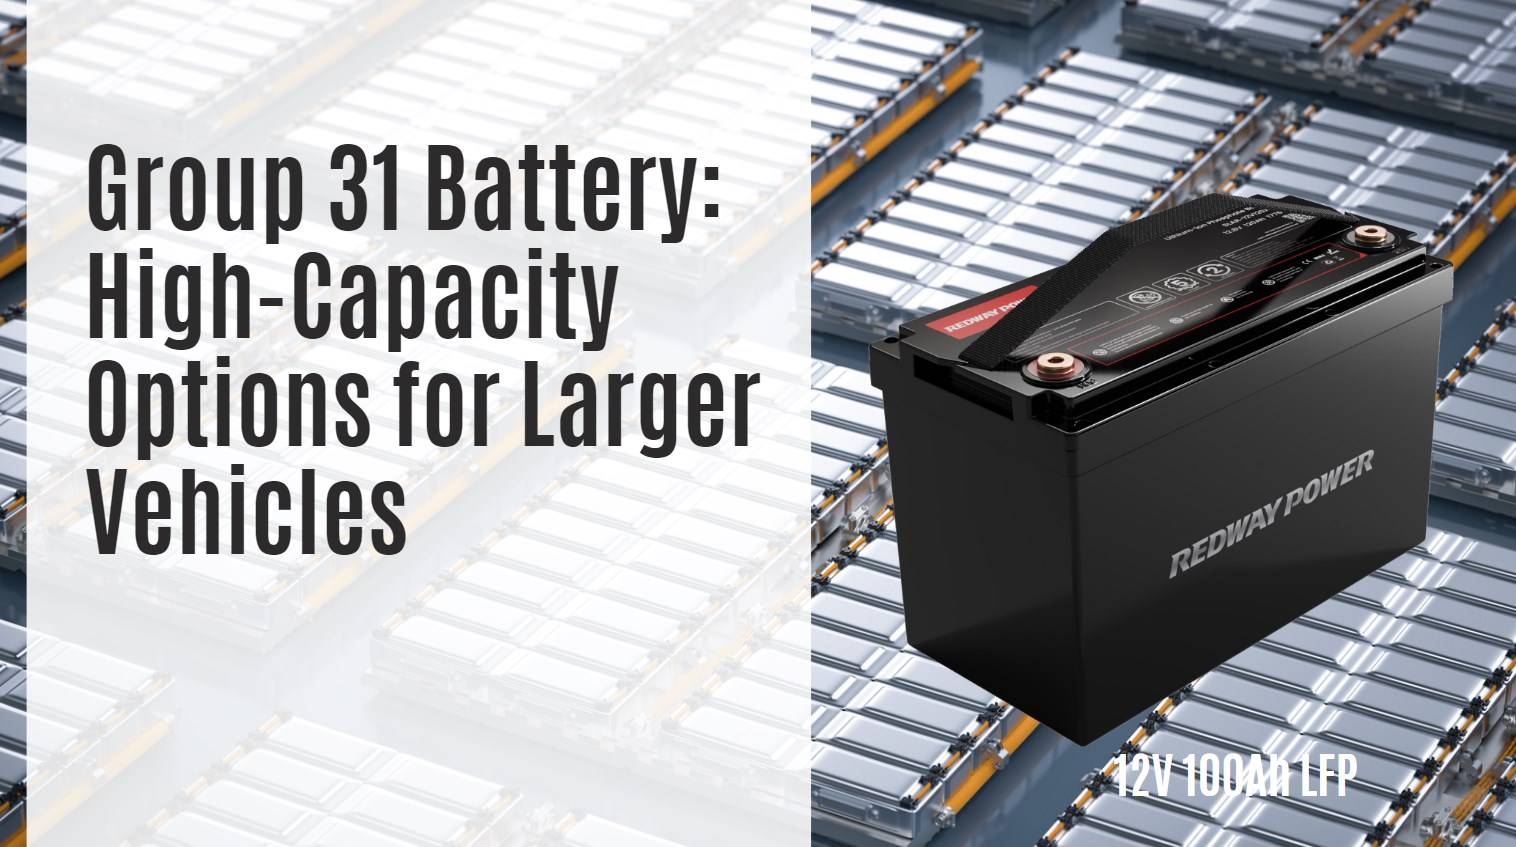 Group 31 Battery: High-Capacity Options for Larger Vehicles. 12v 100ah rv battery lfp redway